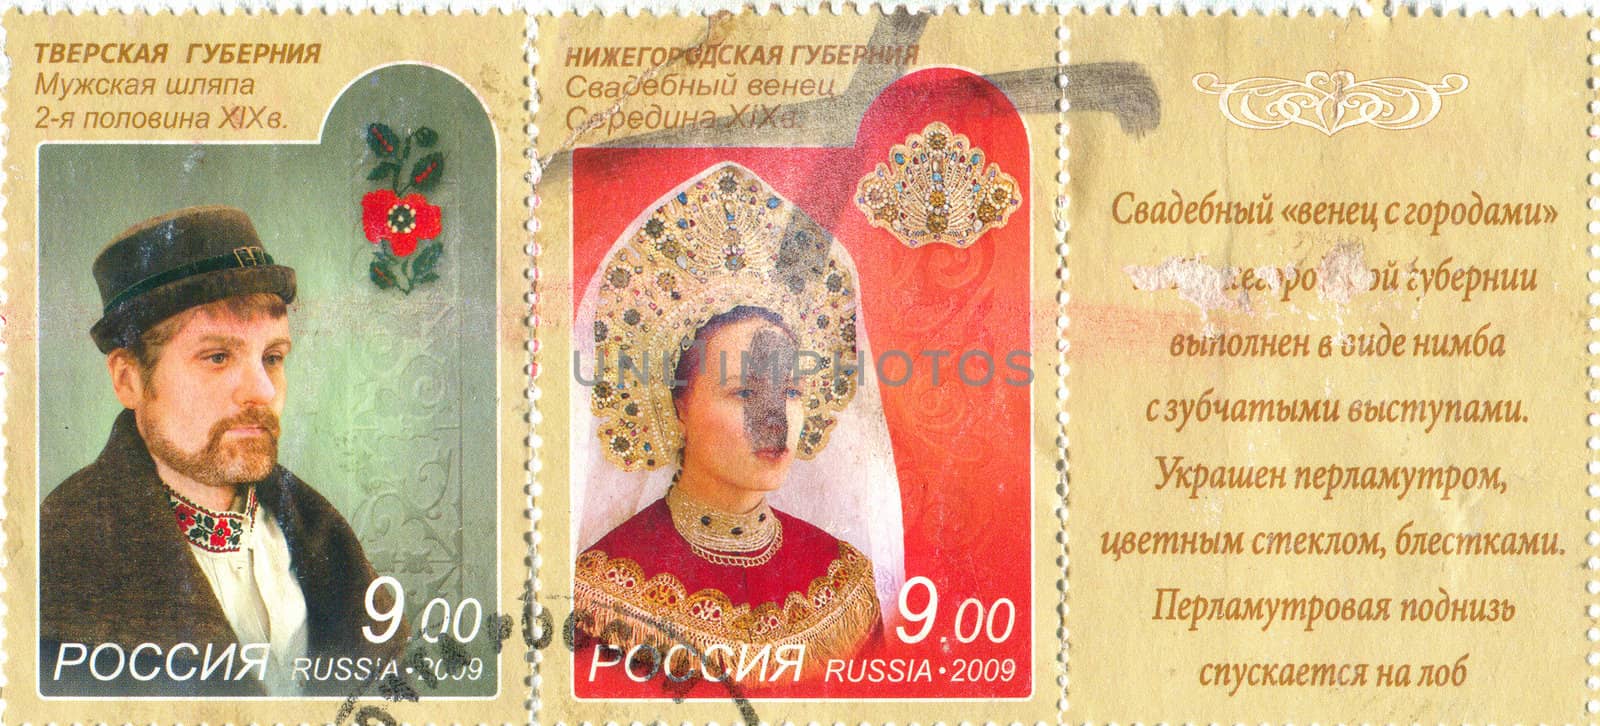 RUSSIA - CIRCA 2009: stamp printed by Russia, shows man and woman, circa 2009.